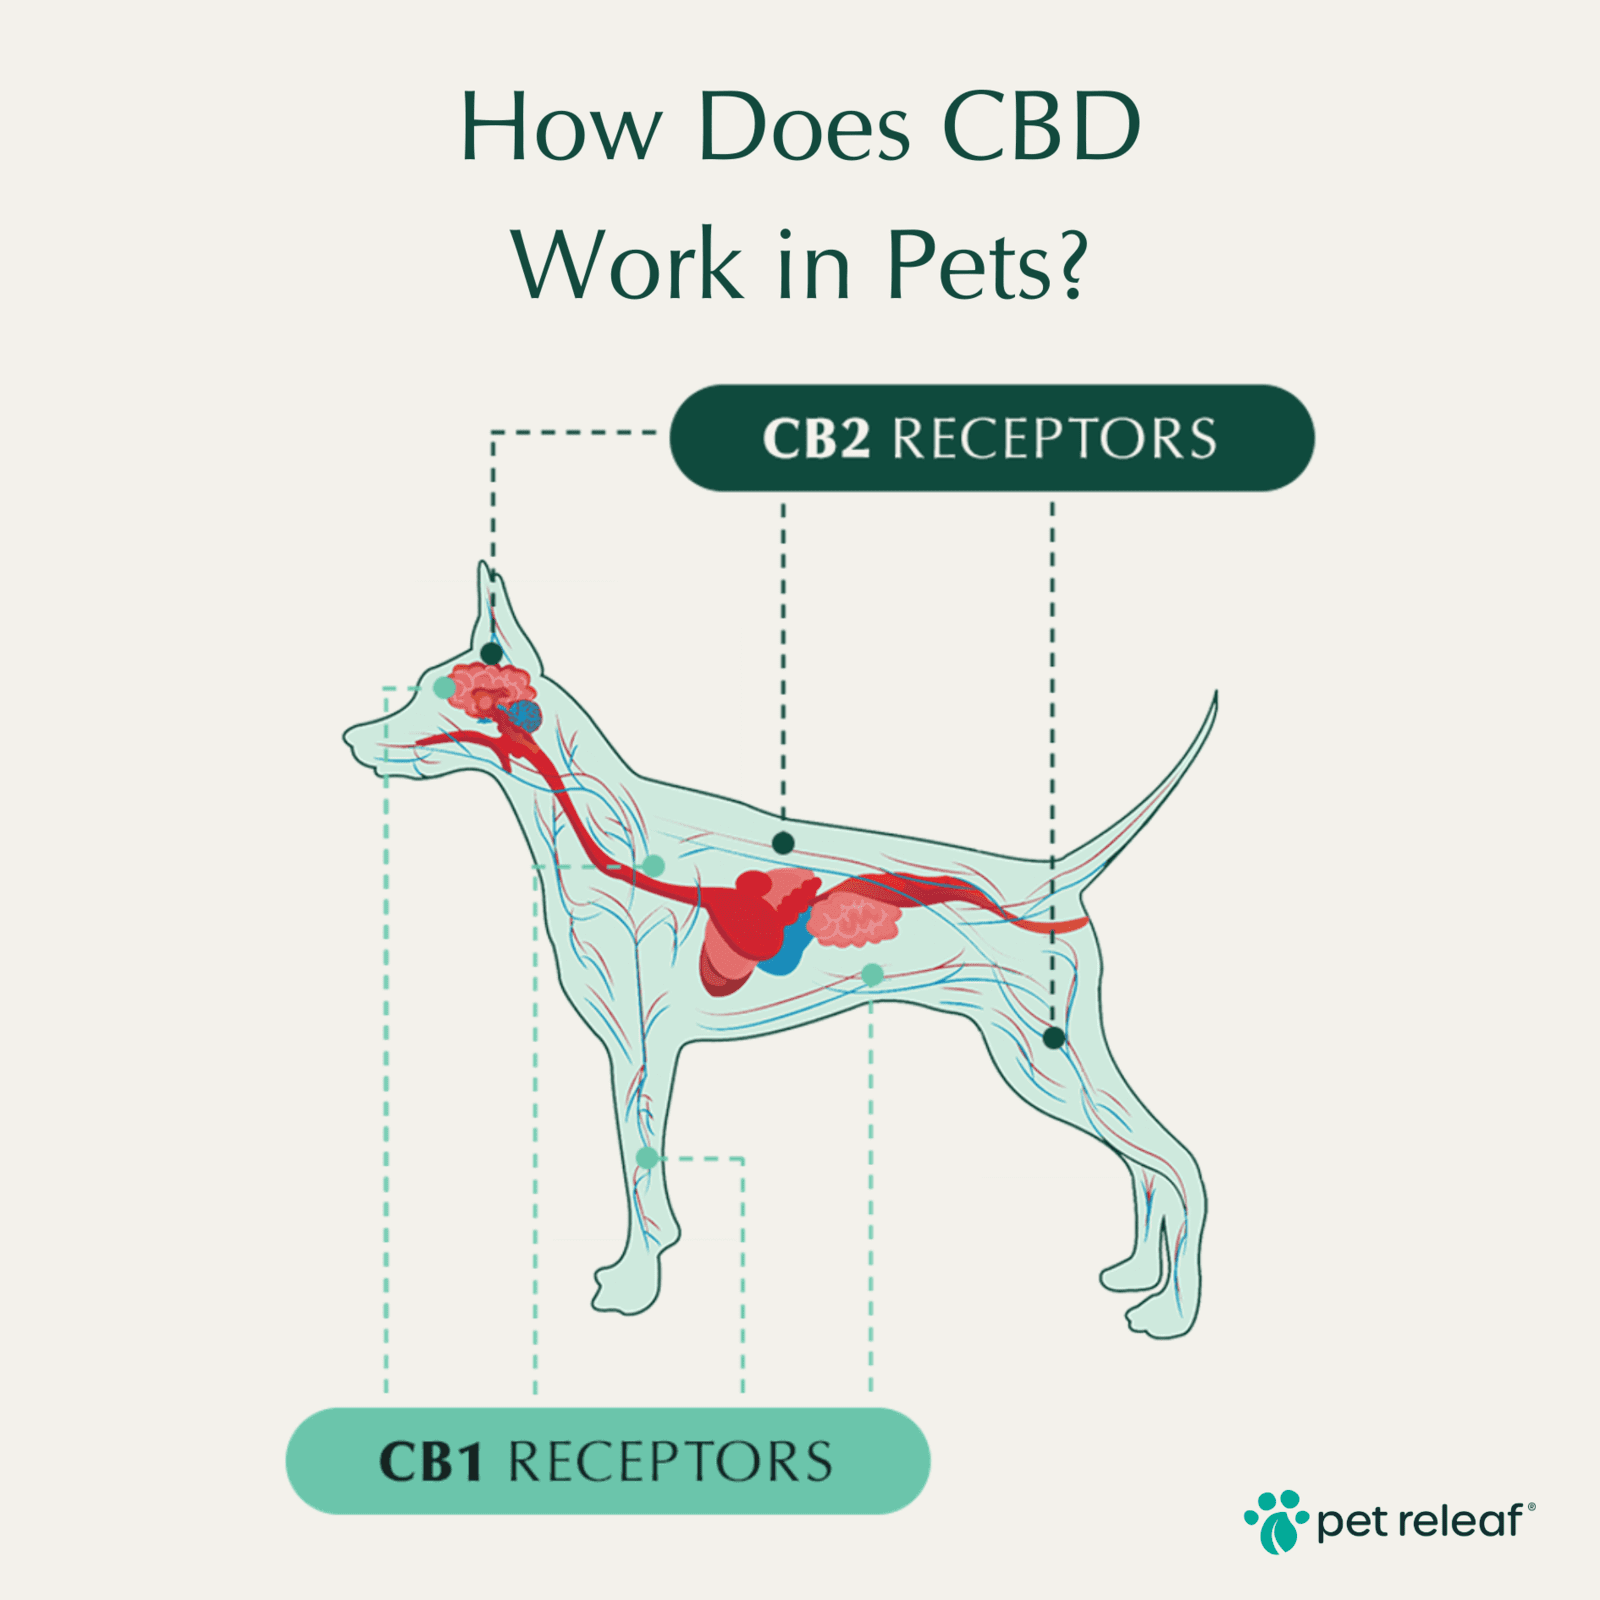 How does CBD Work in Pets